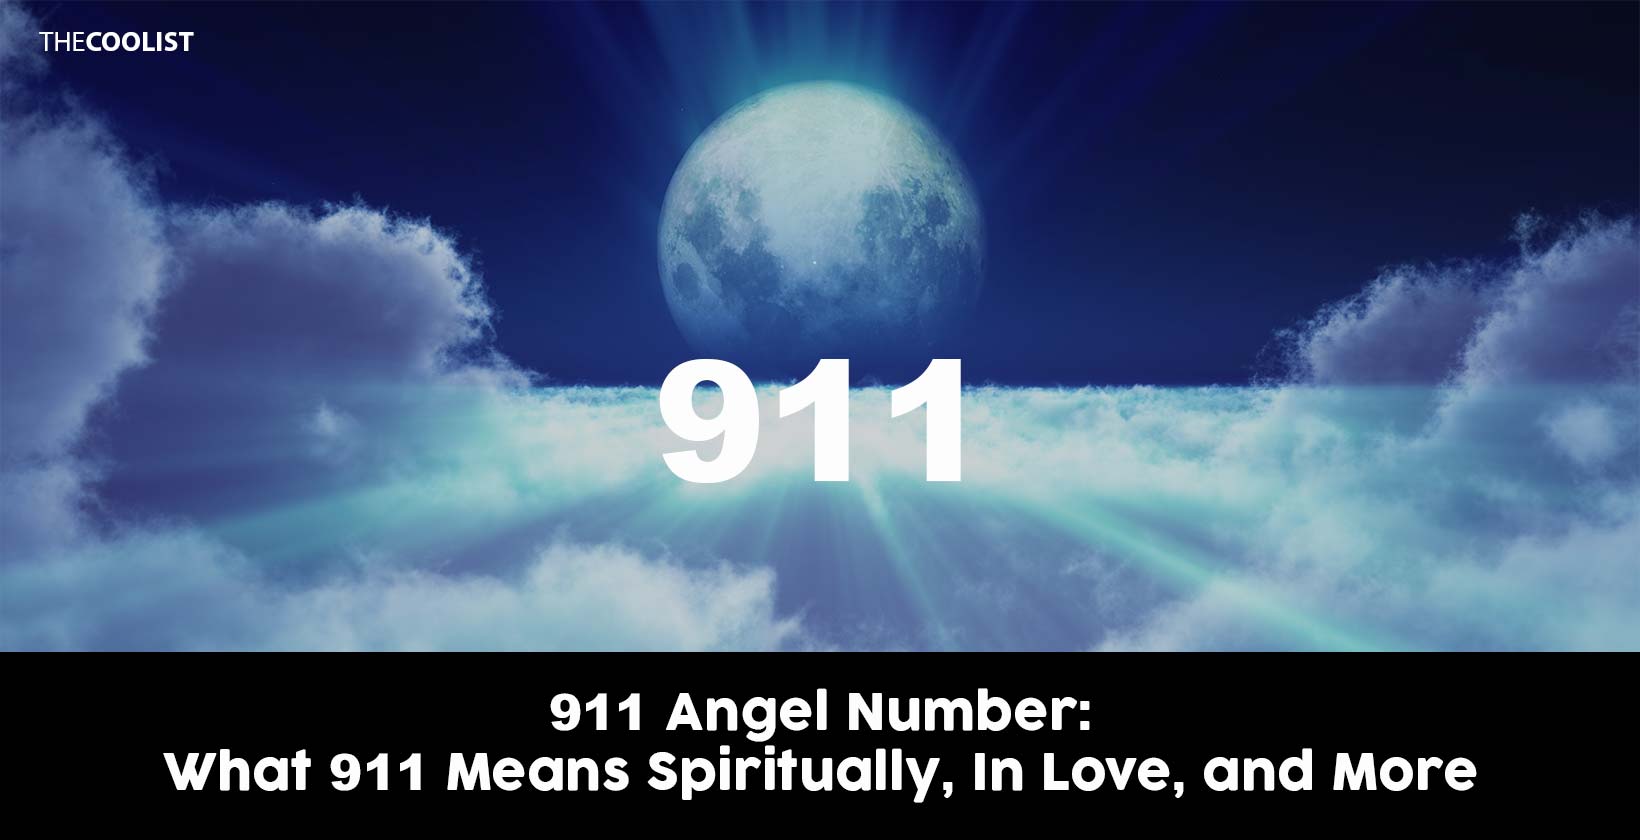 911 Angel Number: What It Means Spiritually, In Love, and More